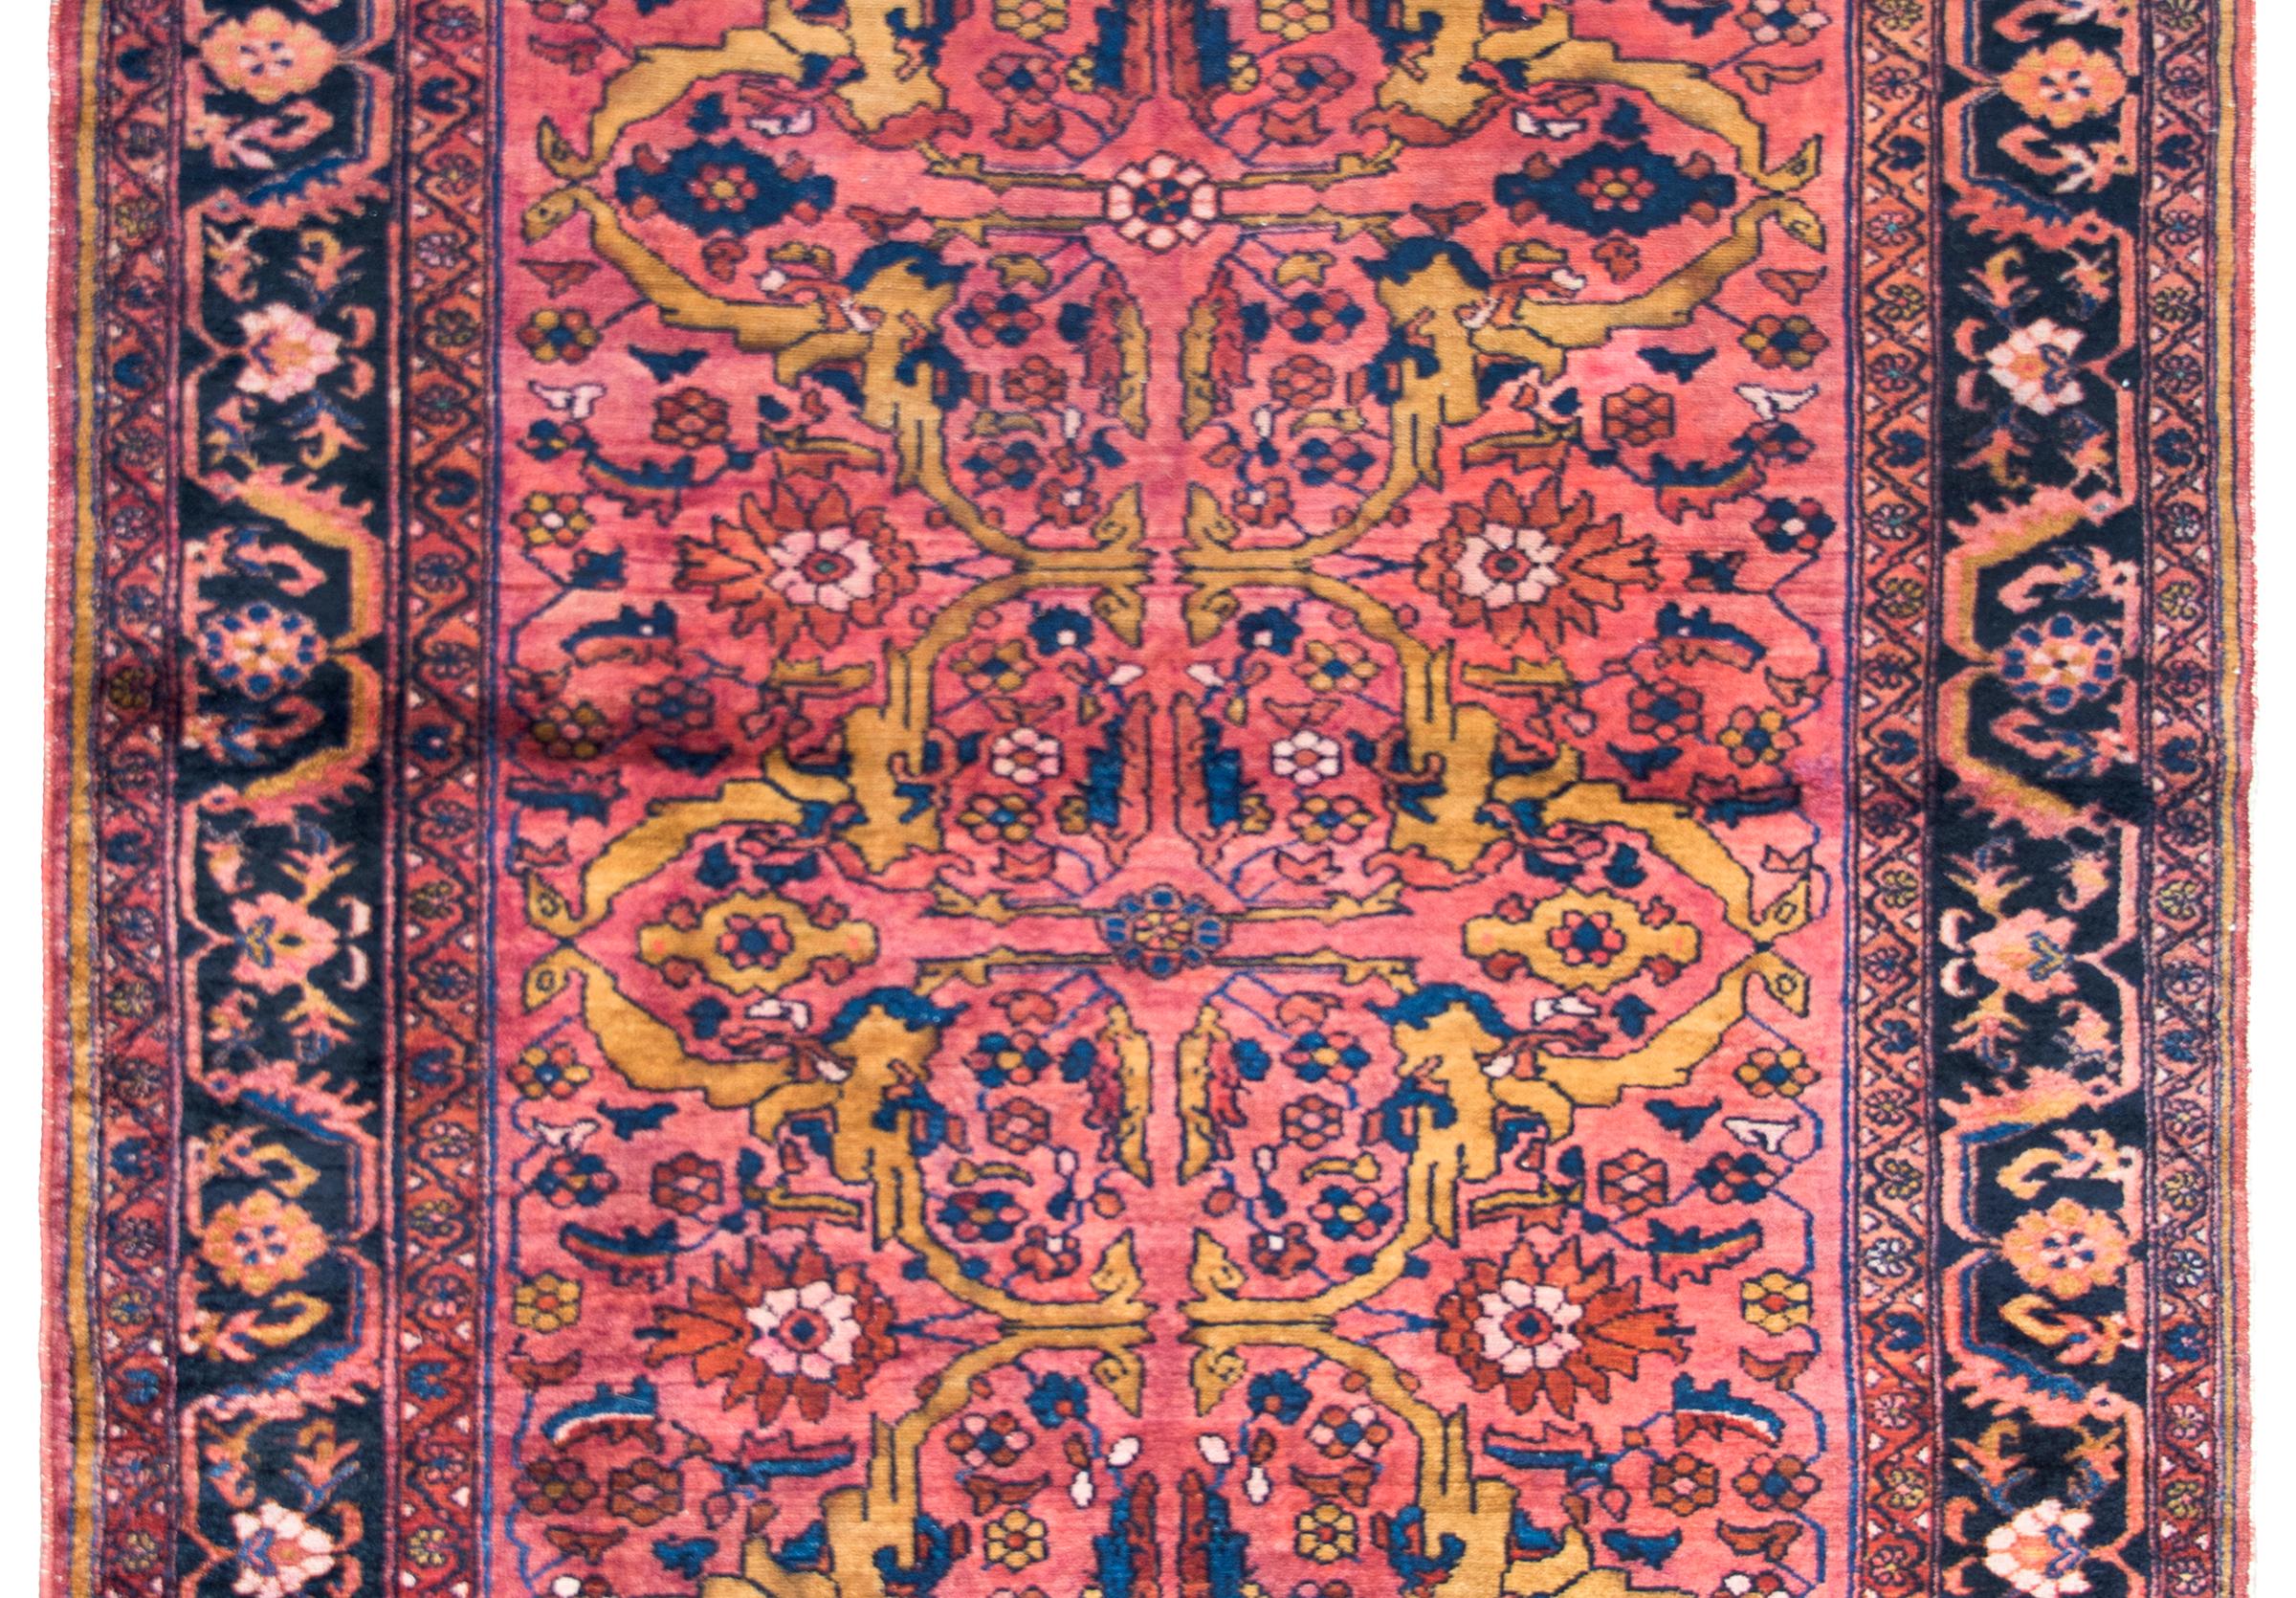 A striking early 20th century Persian Lilihan rug with the most beautiful field with myriad stylized flower and leaves surrounded by a stunning border with a central floral stripe flanked by a pair of petite matching floral partnered stripes, and